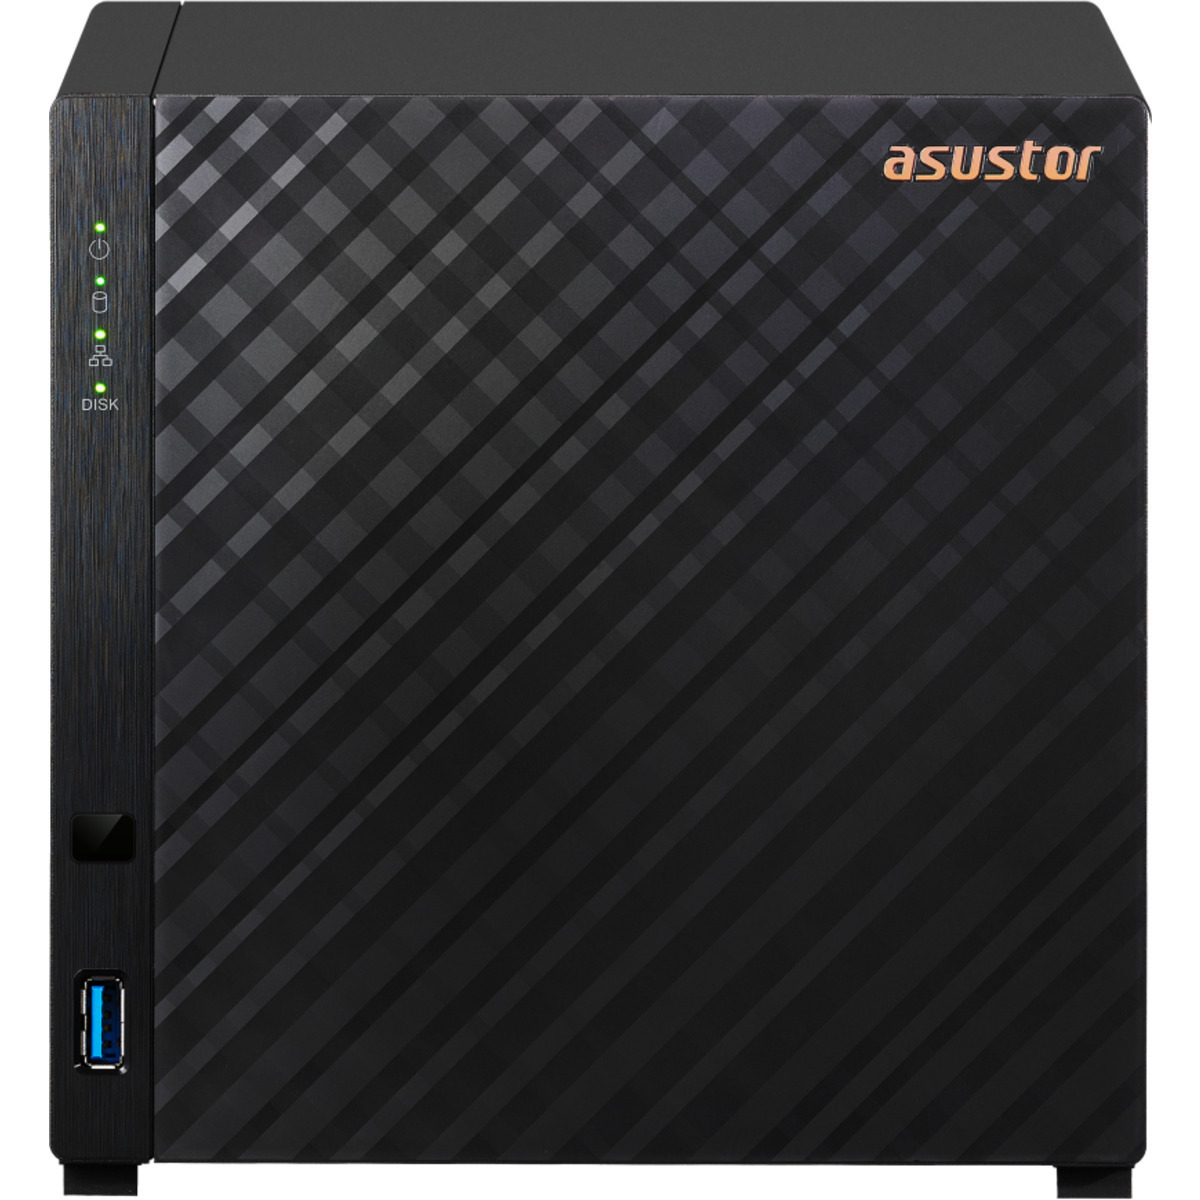 ASUSTOR DRIVESTOR 4 AS1104T 1tb 4-Bay Desktop Personal / Basic Home / Small Office NAS - Network Attached Storage Device 2x500gb Sandisk Ultra 3D SDSSDH3-500G 2.5 560/520MB/s SATA 6Gb/s SSD CONSUMER Class Drives Installed - Burn-In Tested DRIVESTOR 4 AS1104T